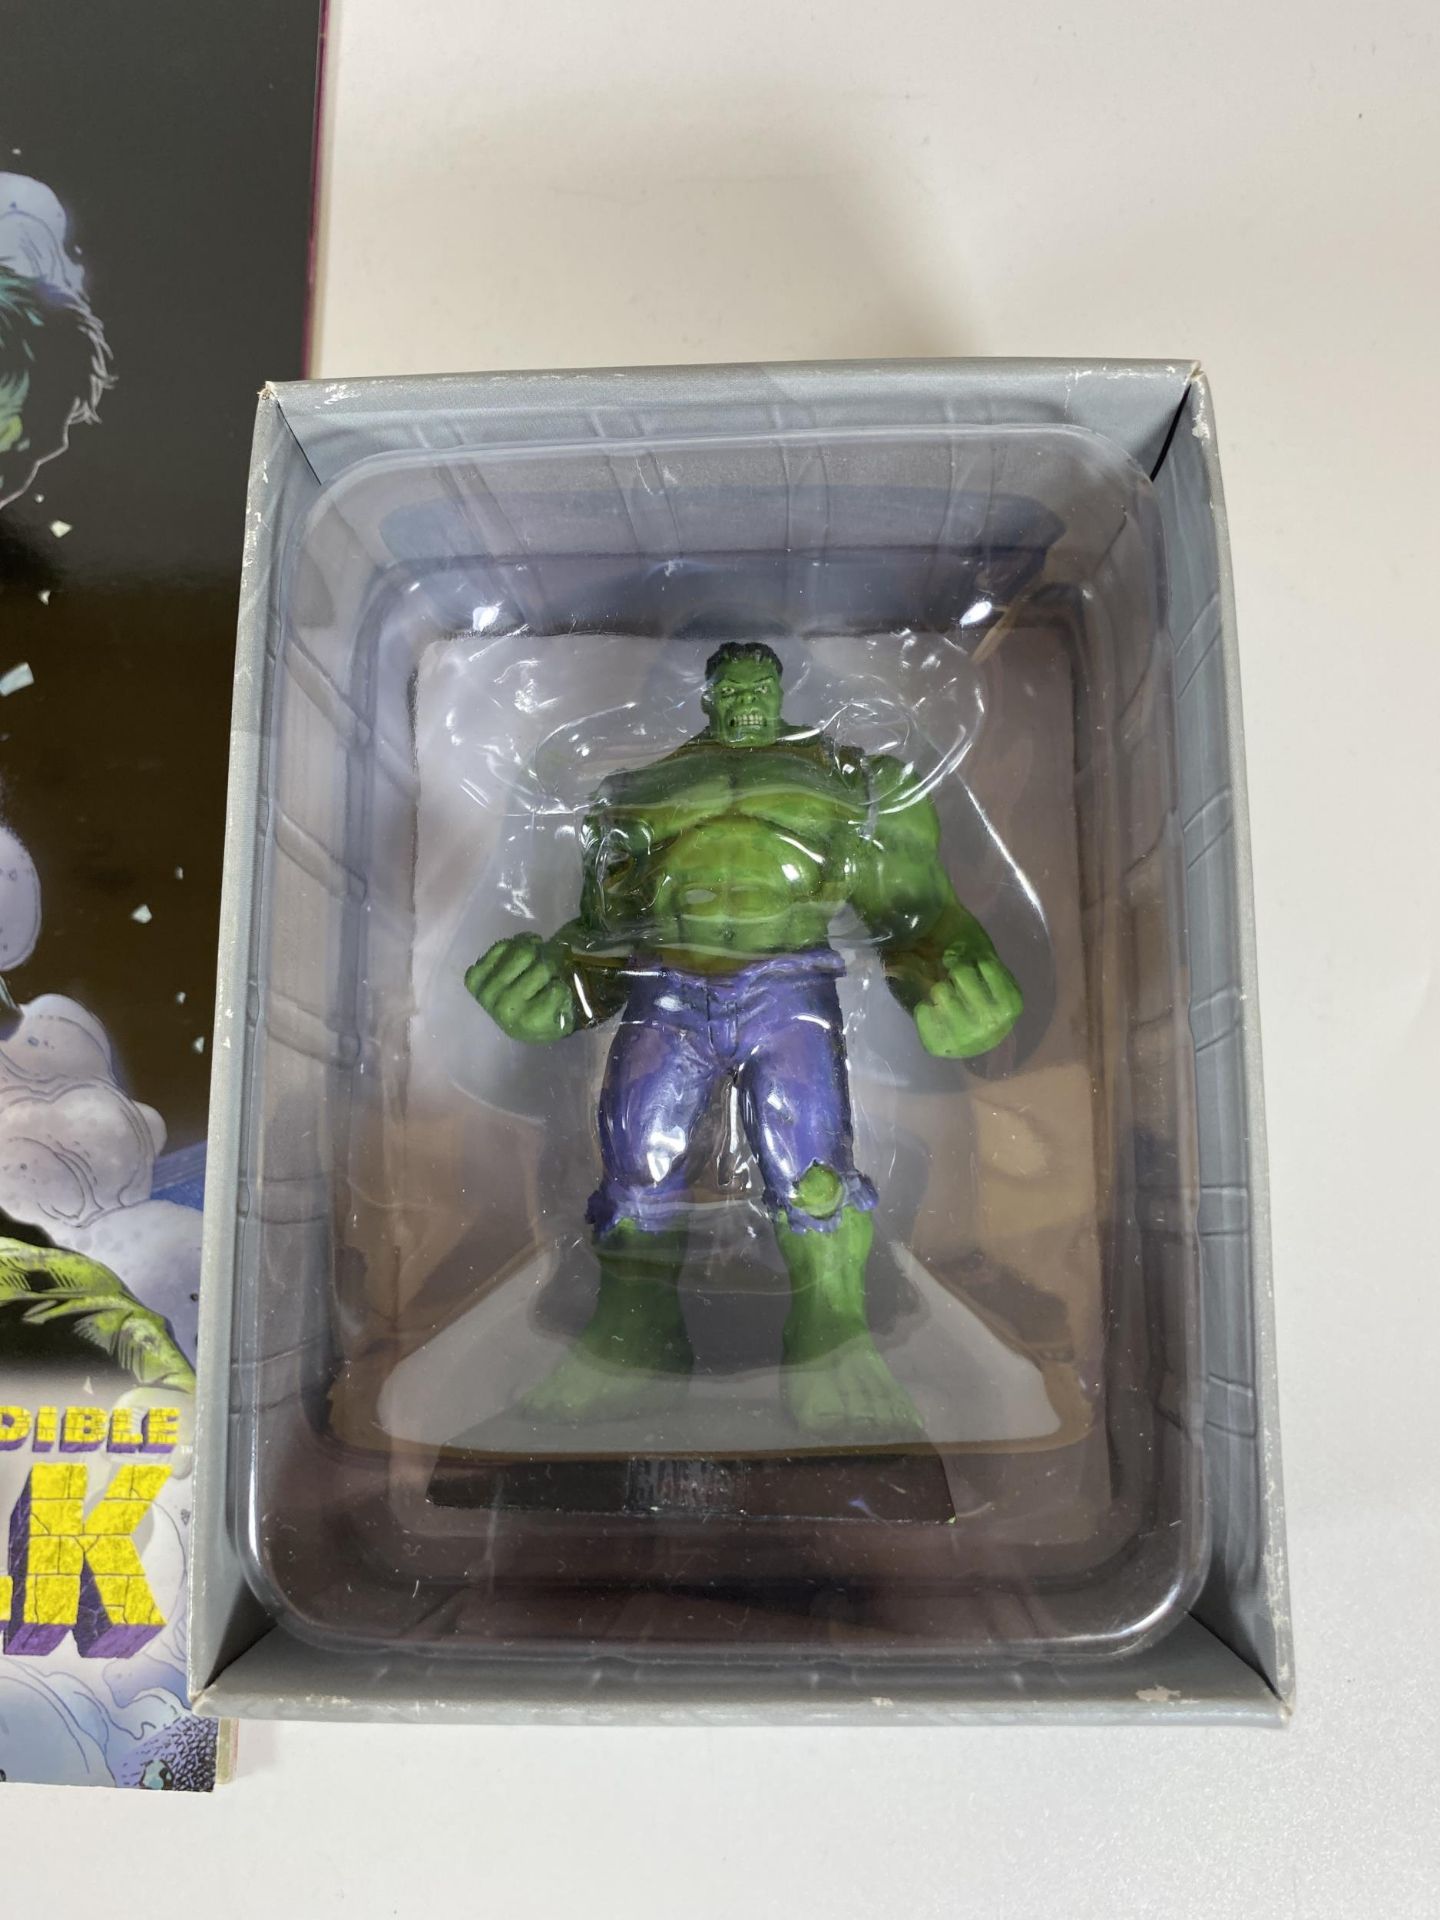 A MARVEL CLASSIC LEAD SPECIAL COLLECTORS FIGURE - HULK WITH MAGAZINE - Image 3 of 5